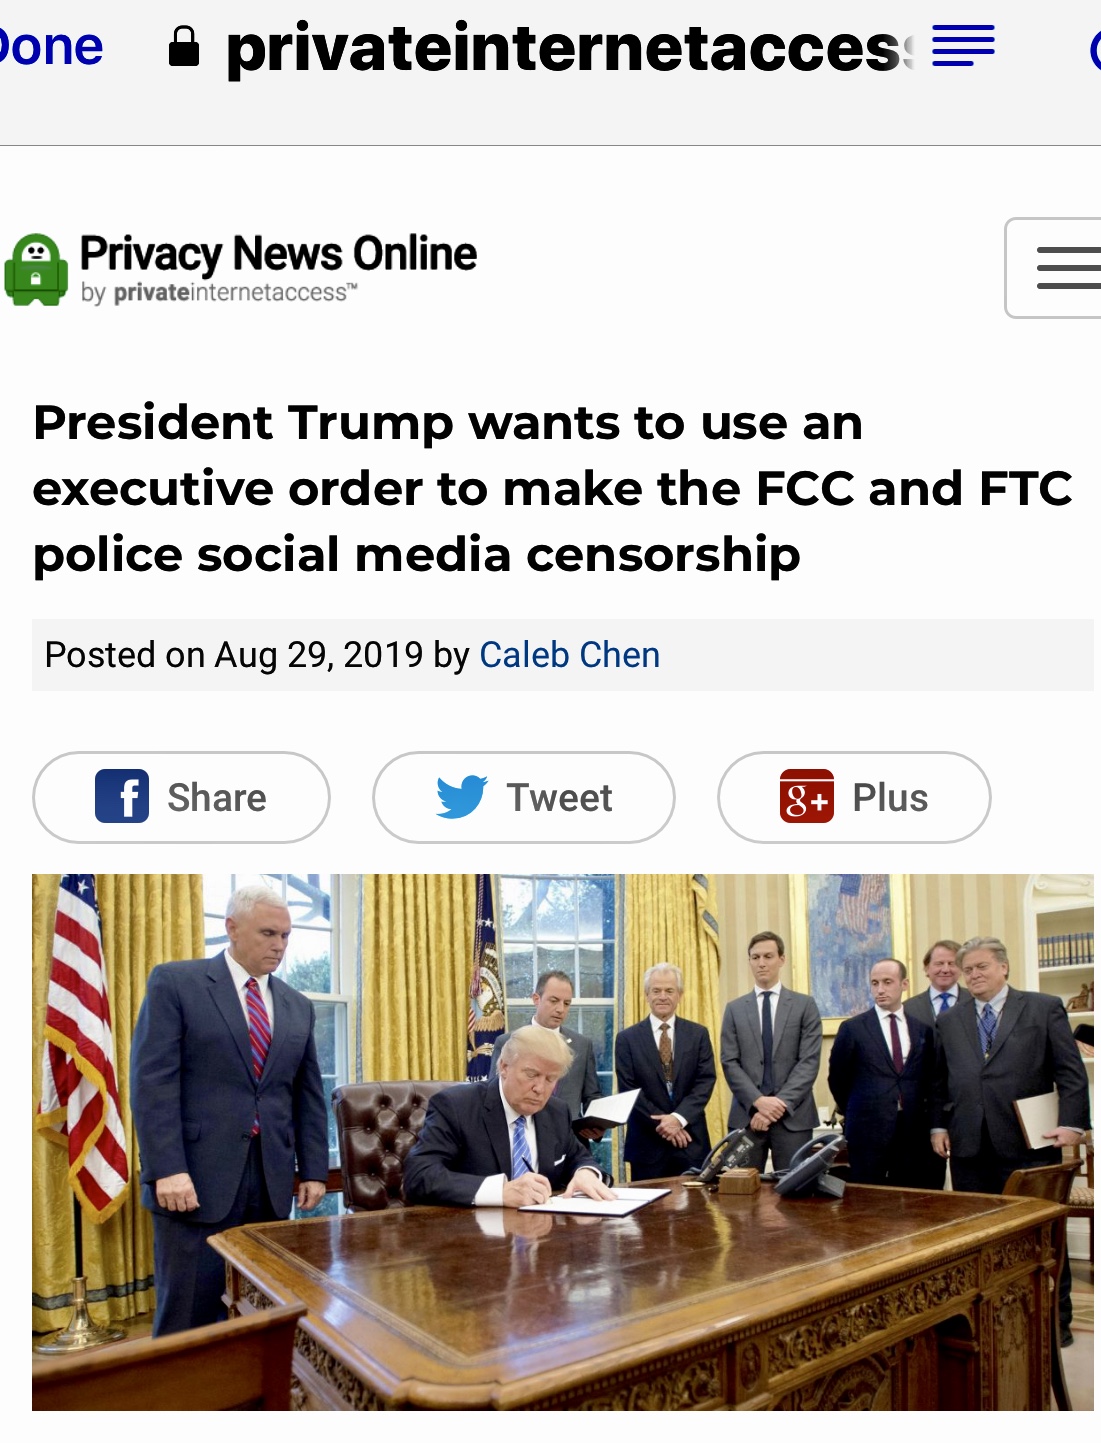 President Trump wants to use an executive order to make the FCC and FTC police social media censorship